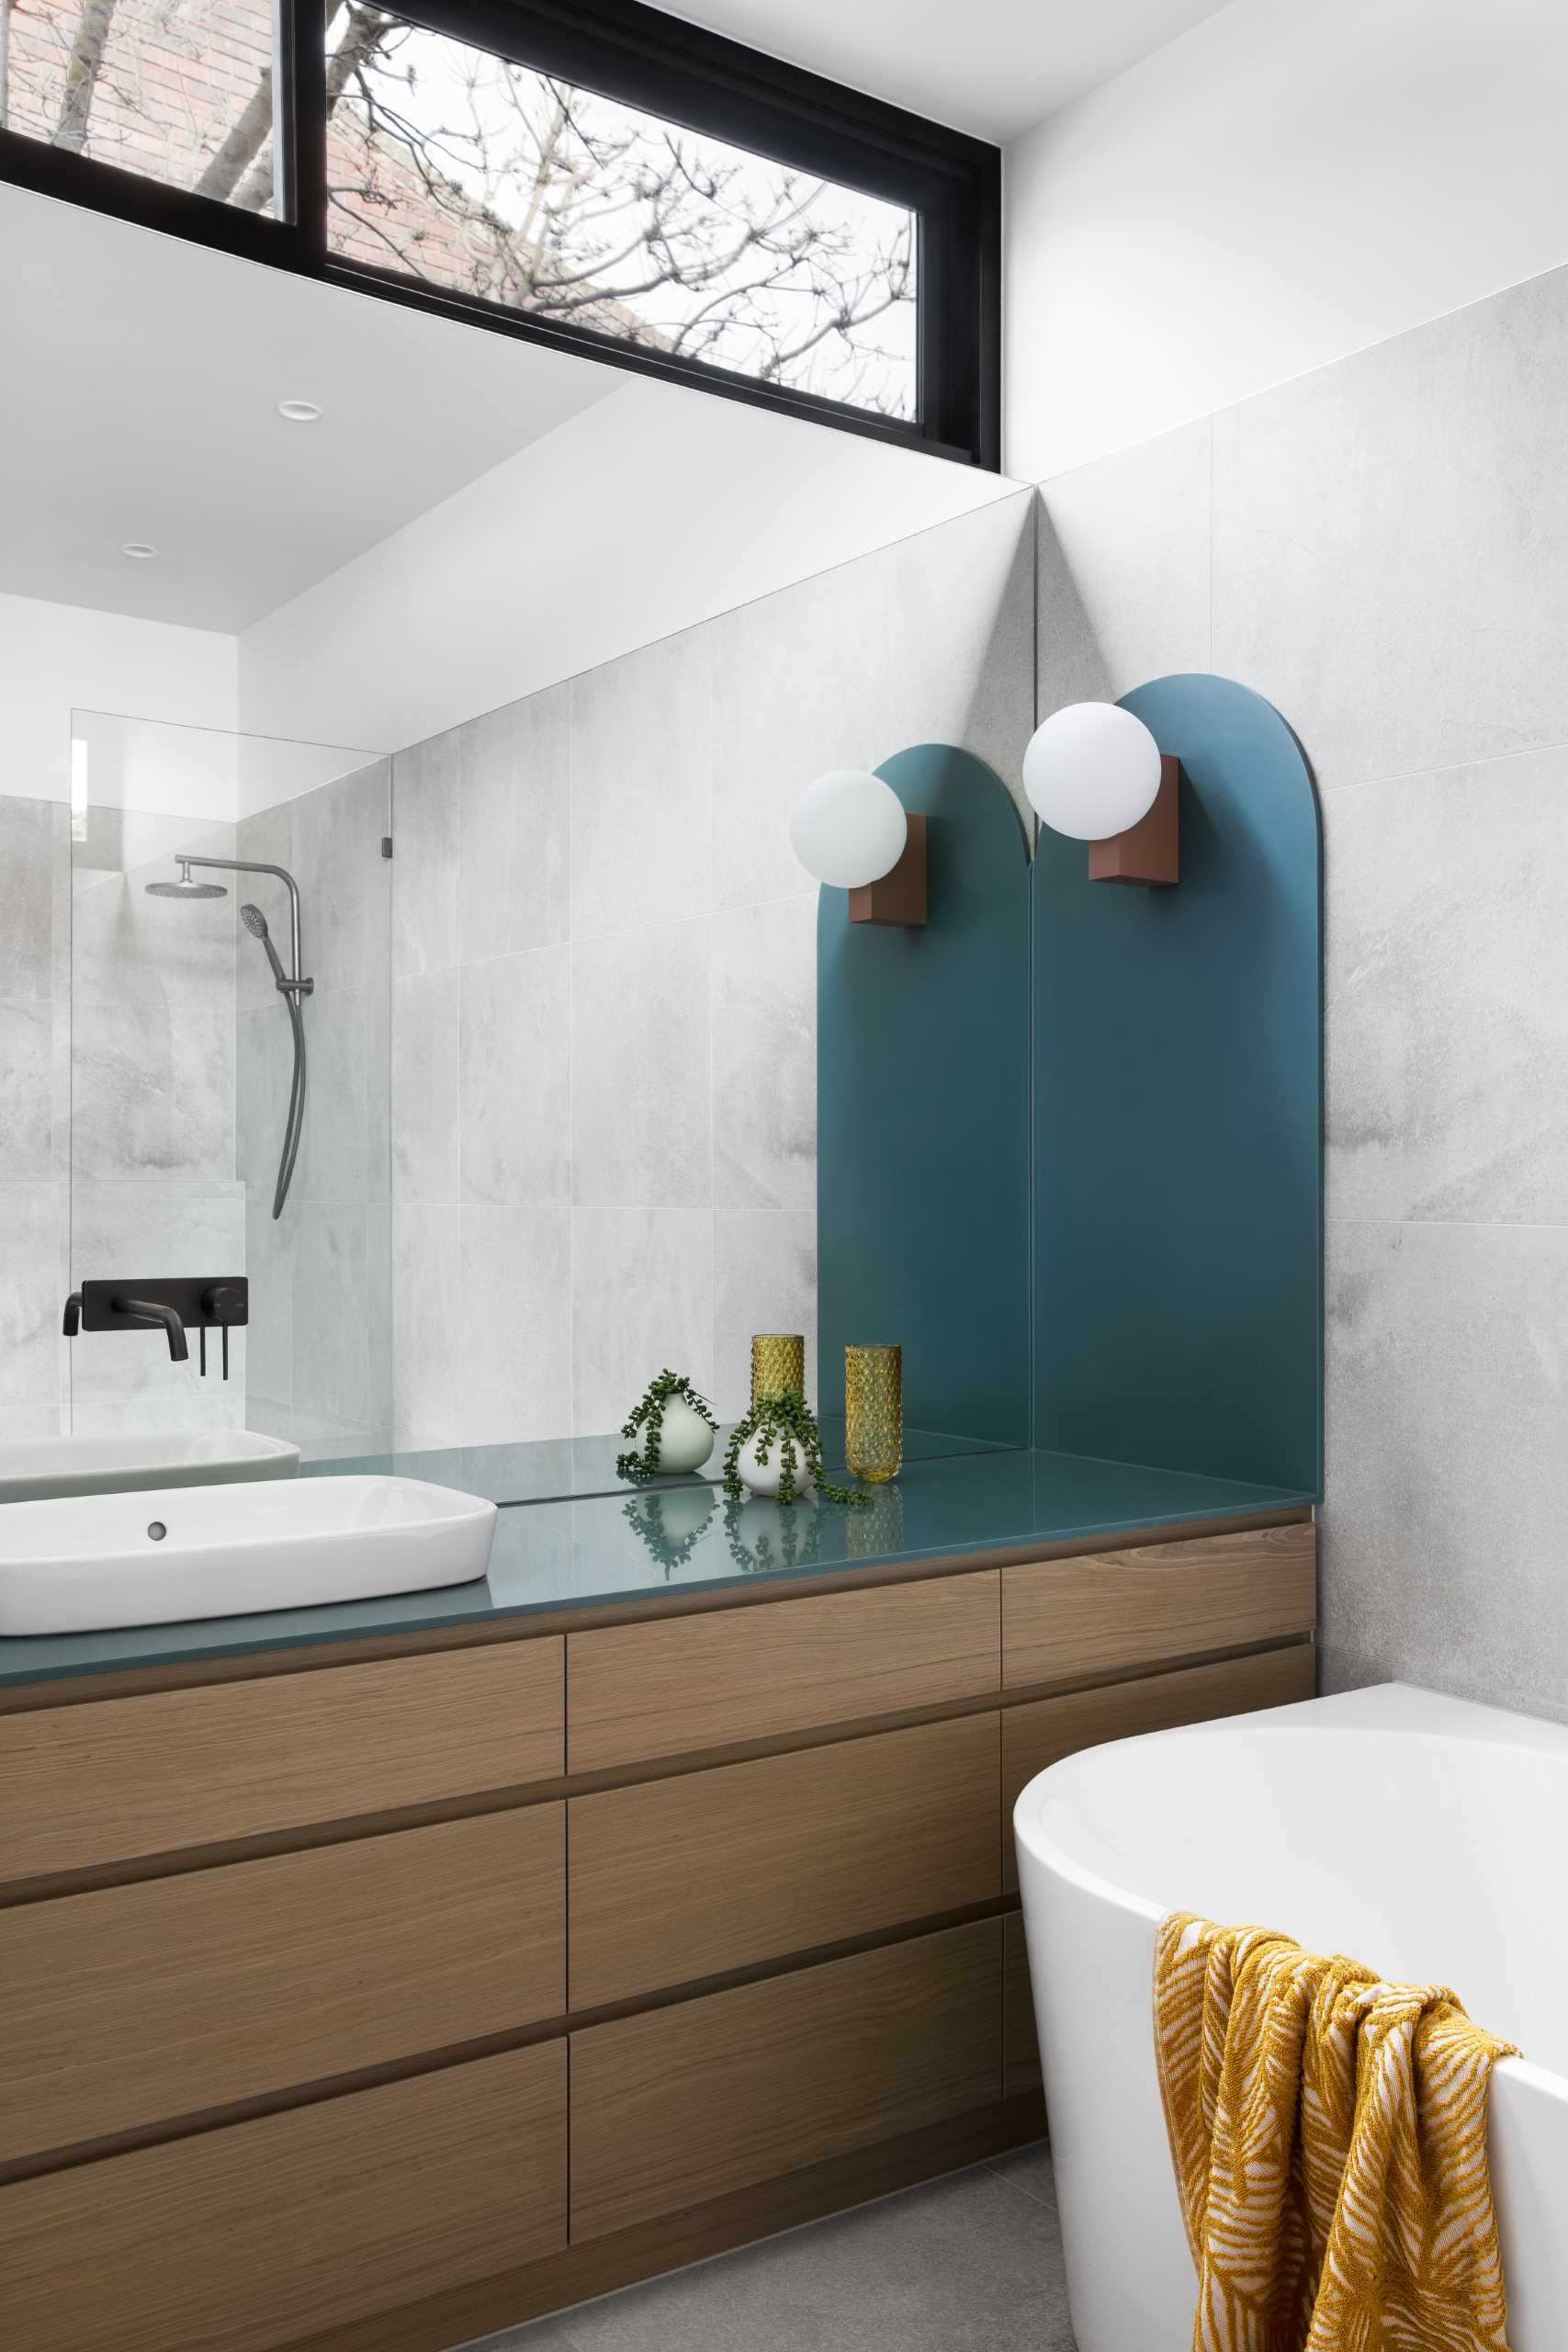 A modern bathroom with a large mirror, teal countertop, wood vanity, and a walk-in shower.